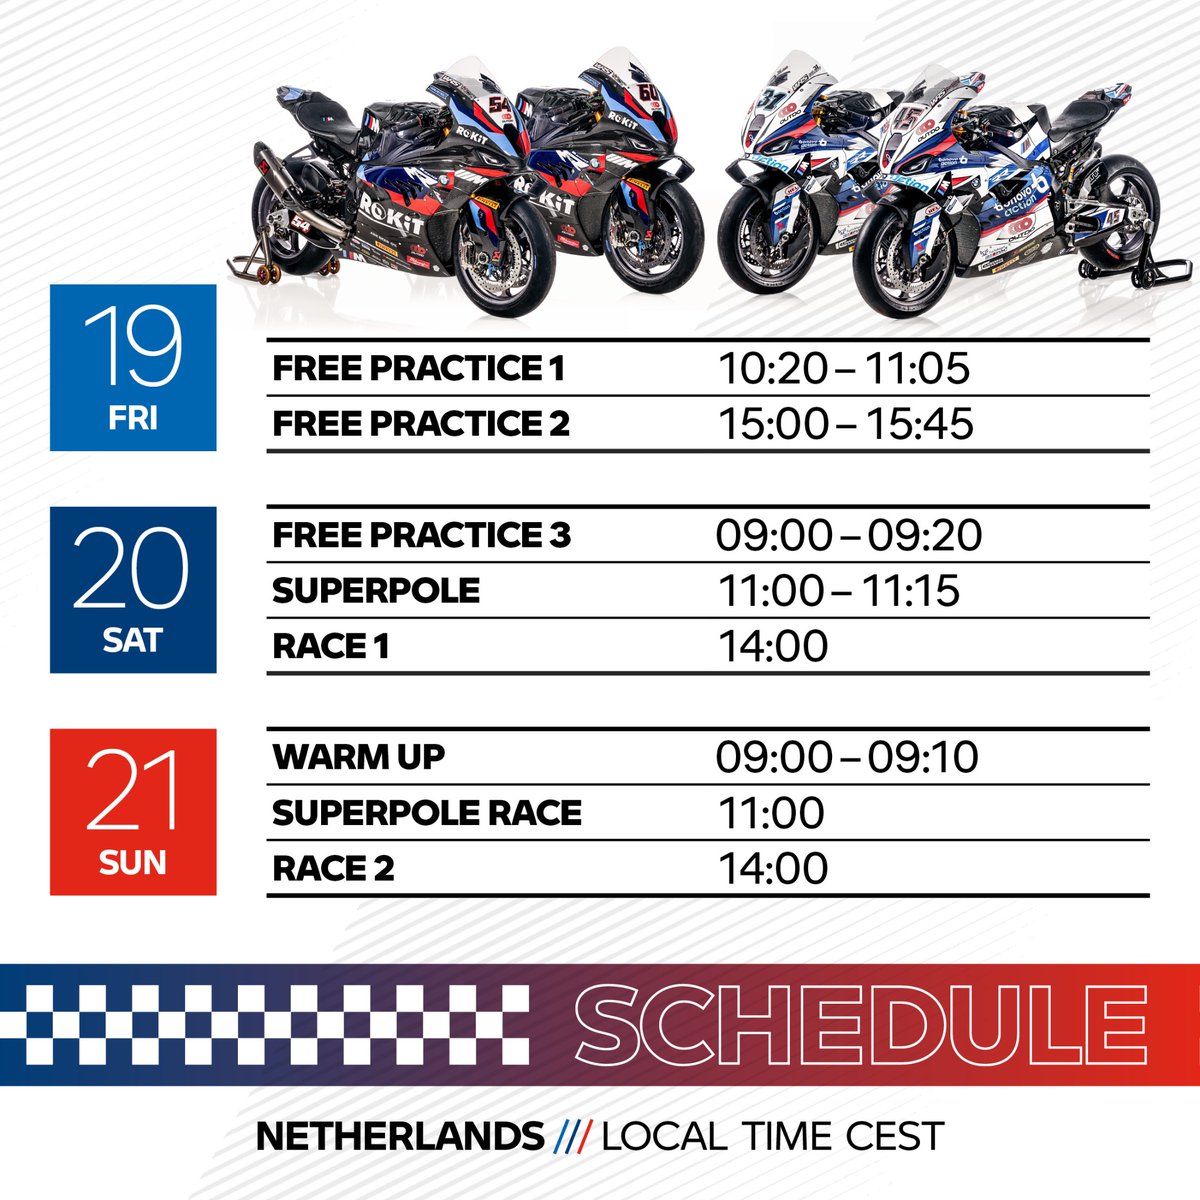 Weekend plans who? We can’t wait for the race to begin🤩🤩 Are you excited? #worldsbk #rokitbmwmotorradwsbk #WeAreROKiT